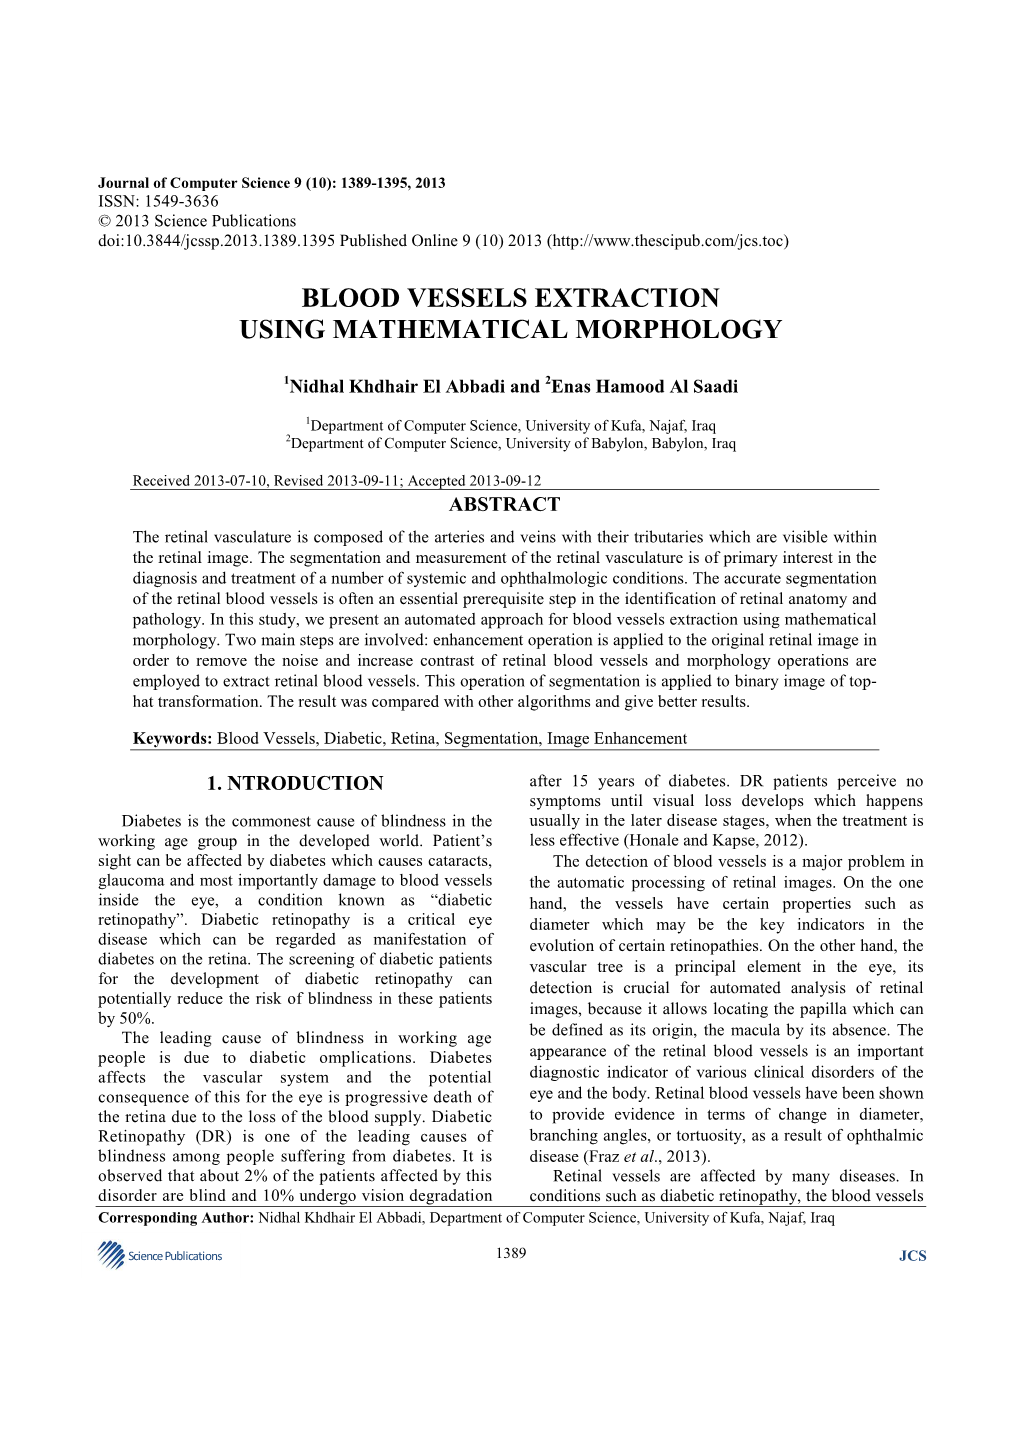 Blood Vessels Extraction Using Mathematical Morphology